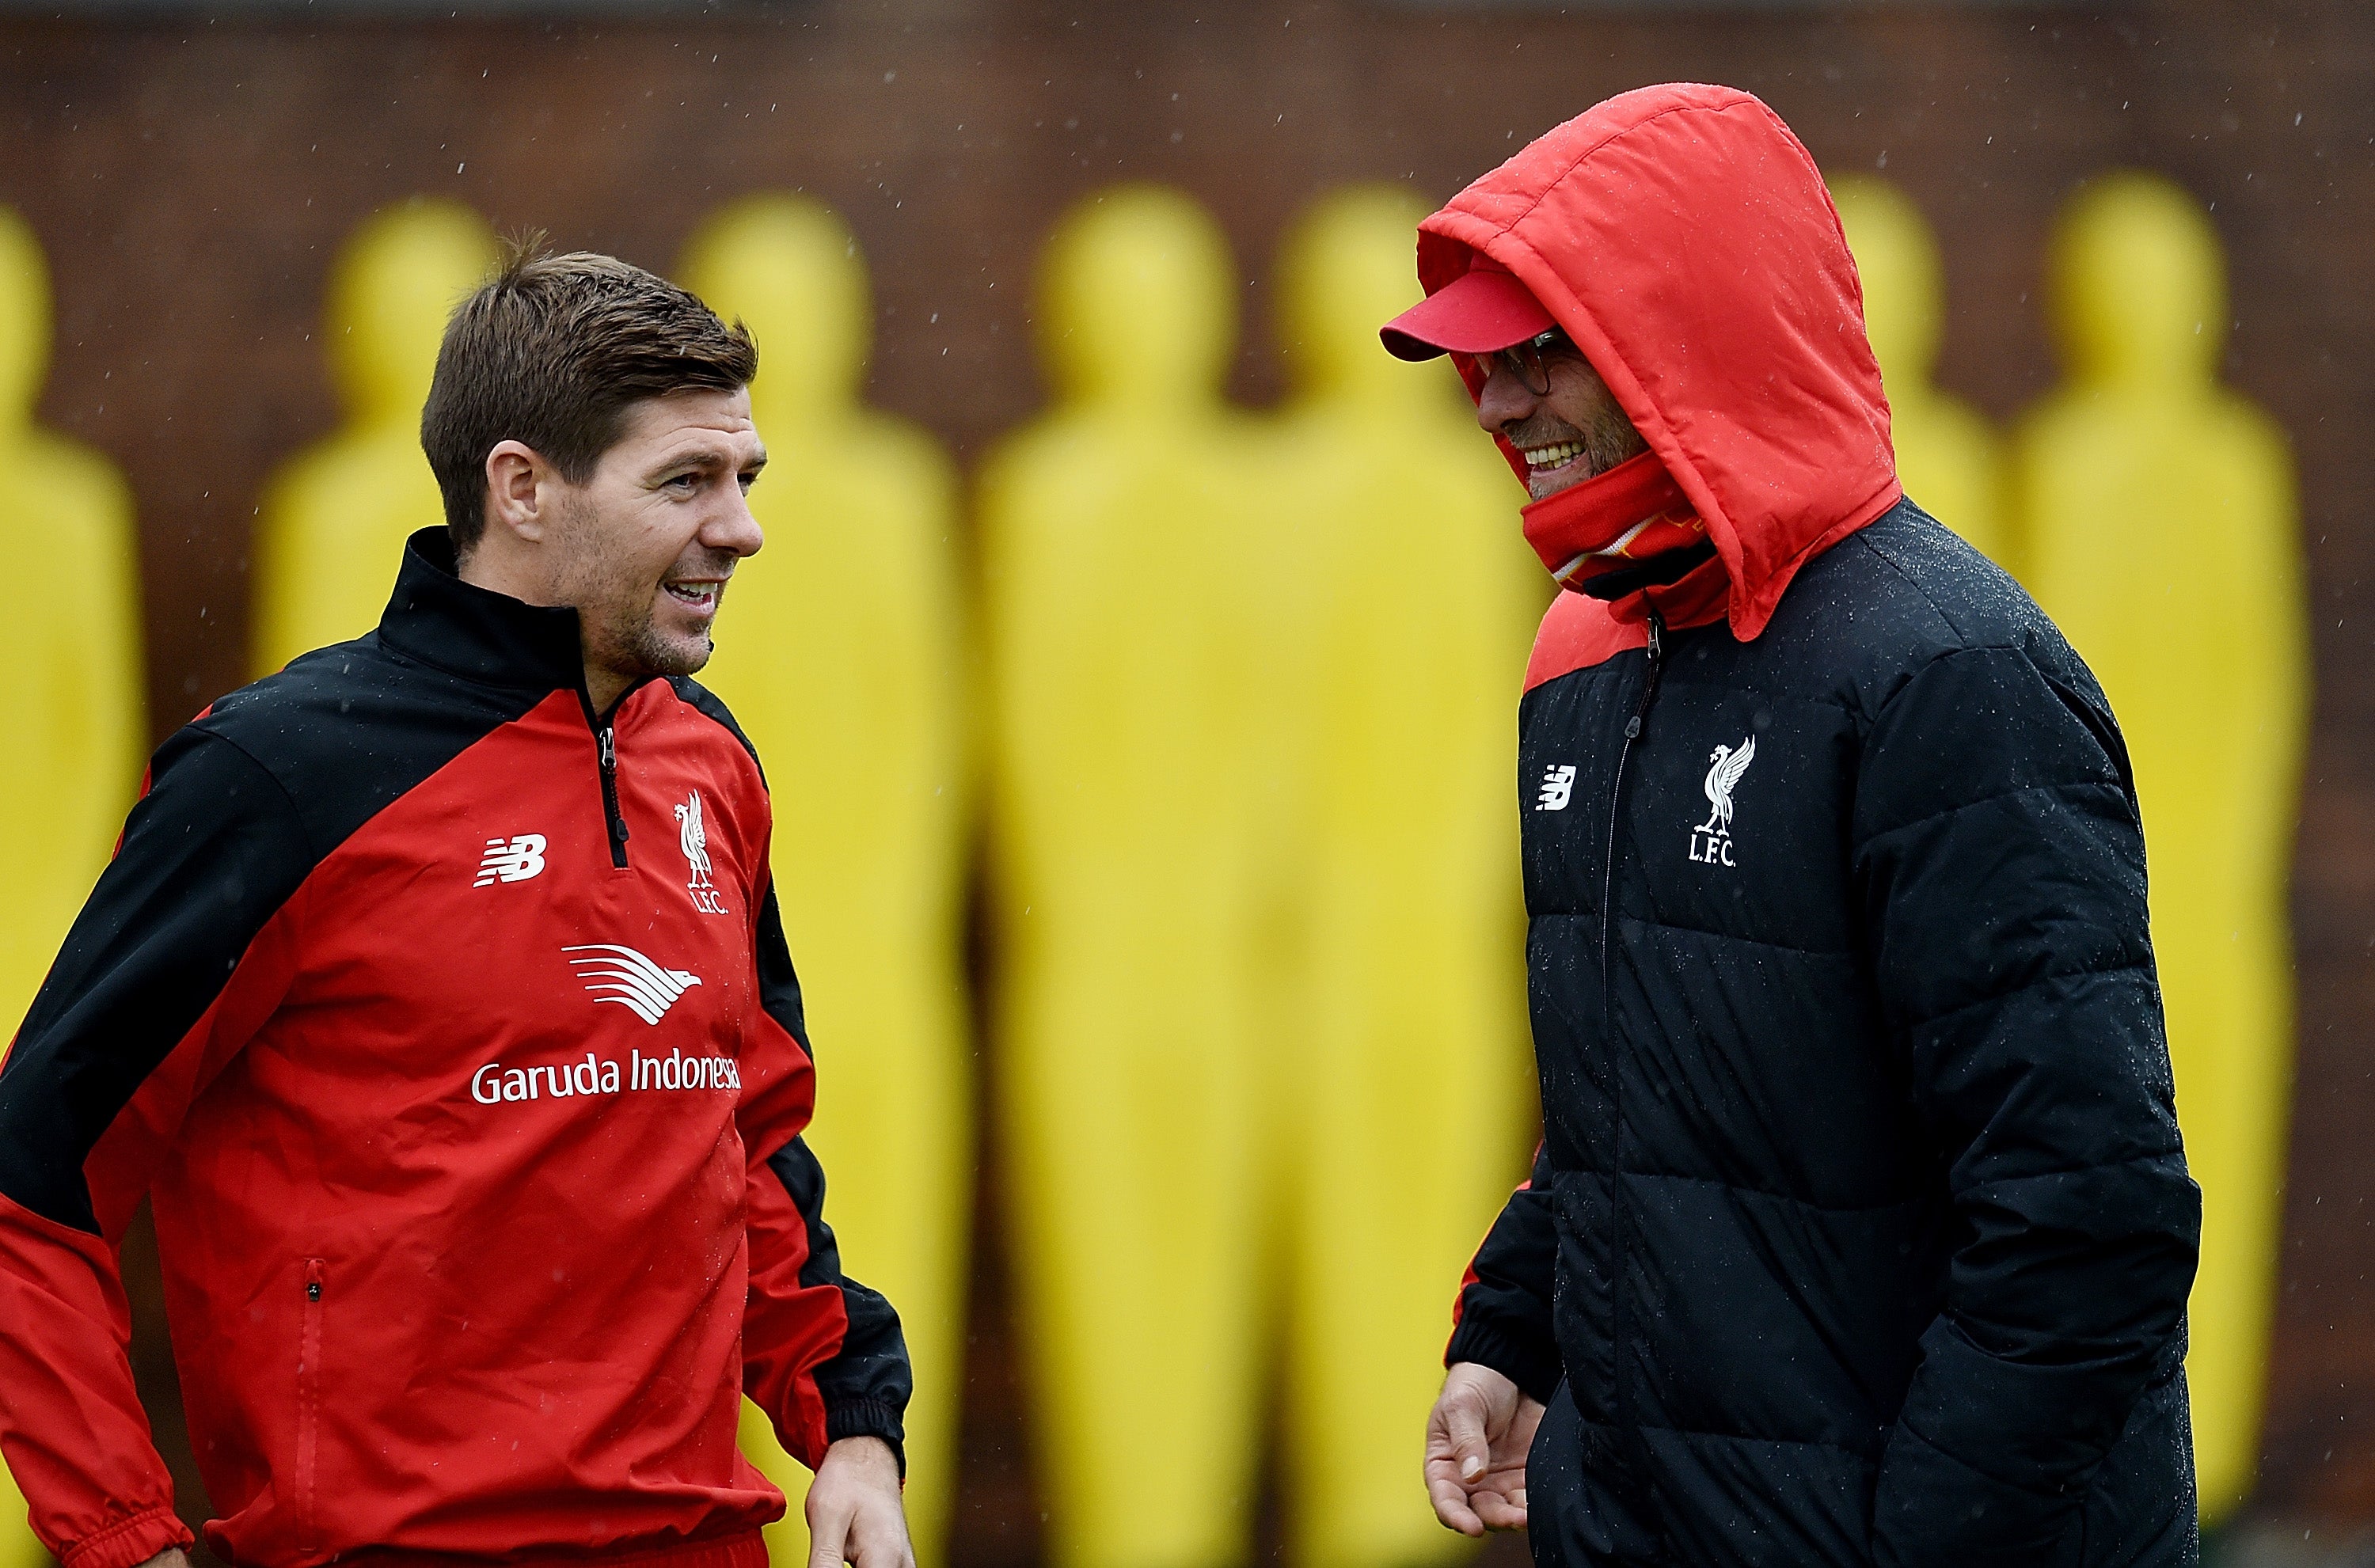 Steven Gerrard shares a conversation during the early stages of Jurgen Klopp’s reign at Anfield